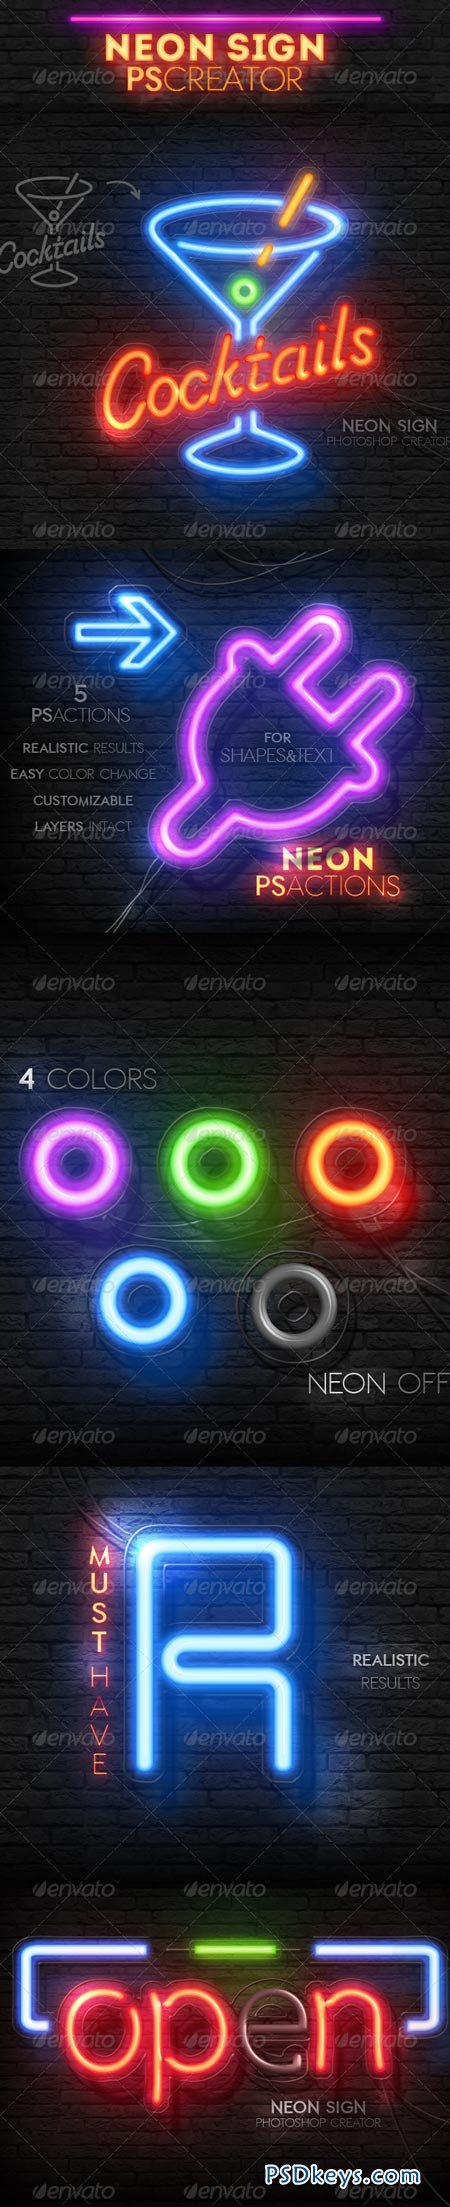 Neon Light Sign Photoshop Actions 8657469